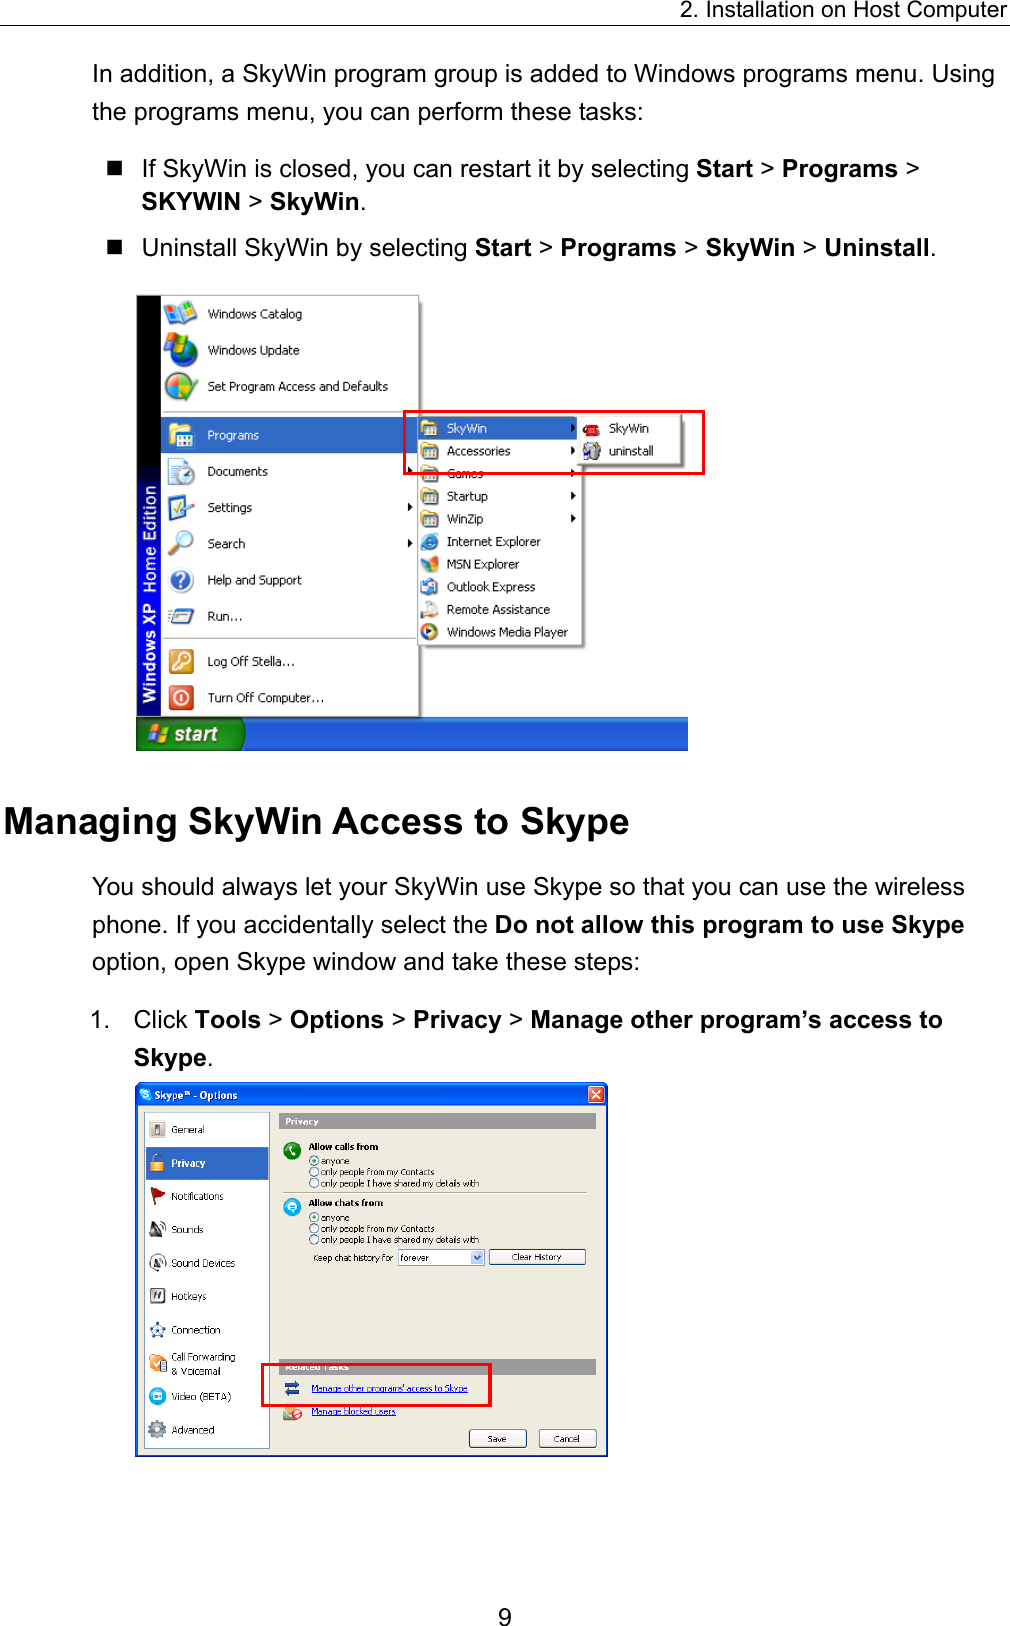 2. Installation on Host Computer In addition, a SkyWin program group is added to Windows programs menu. Using the programs menu, you can perform these tasks:    If SkyWin is closed, you can restart it by selecting Start &gt; Programs &gt; SKYWIN &gt; SkyWin.  Uninstall SkyWin by selecting Start &gt; Programs &gt; SkyWin &gt; Uninstall.  Managing SkyWin Access to Skype You should always let your SkyWin use Skype so that you can use the wireless phone. If you accidentally select the Do not allow this program to use Skype option, open Skype window and take these steps: 1. Click Tools &gt; Options &gt; Privacy &gt; Manage other program’s access to Skype.   9 